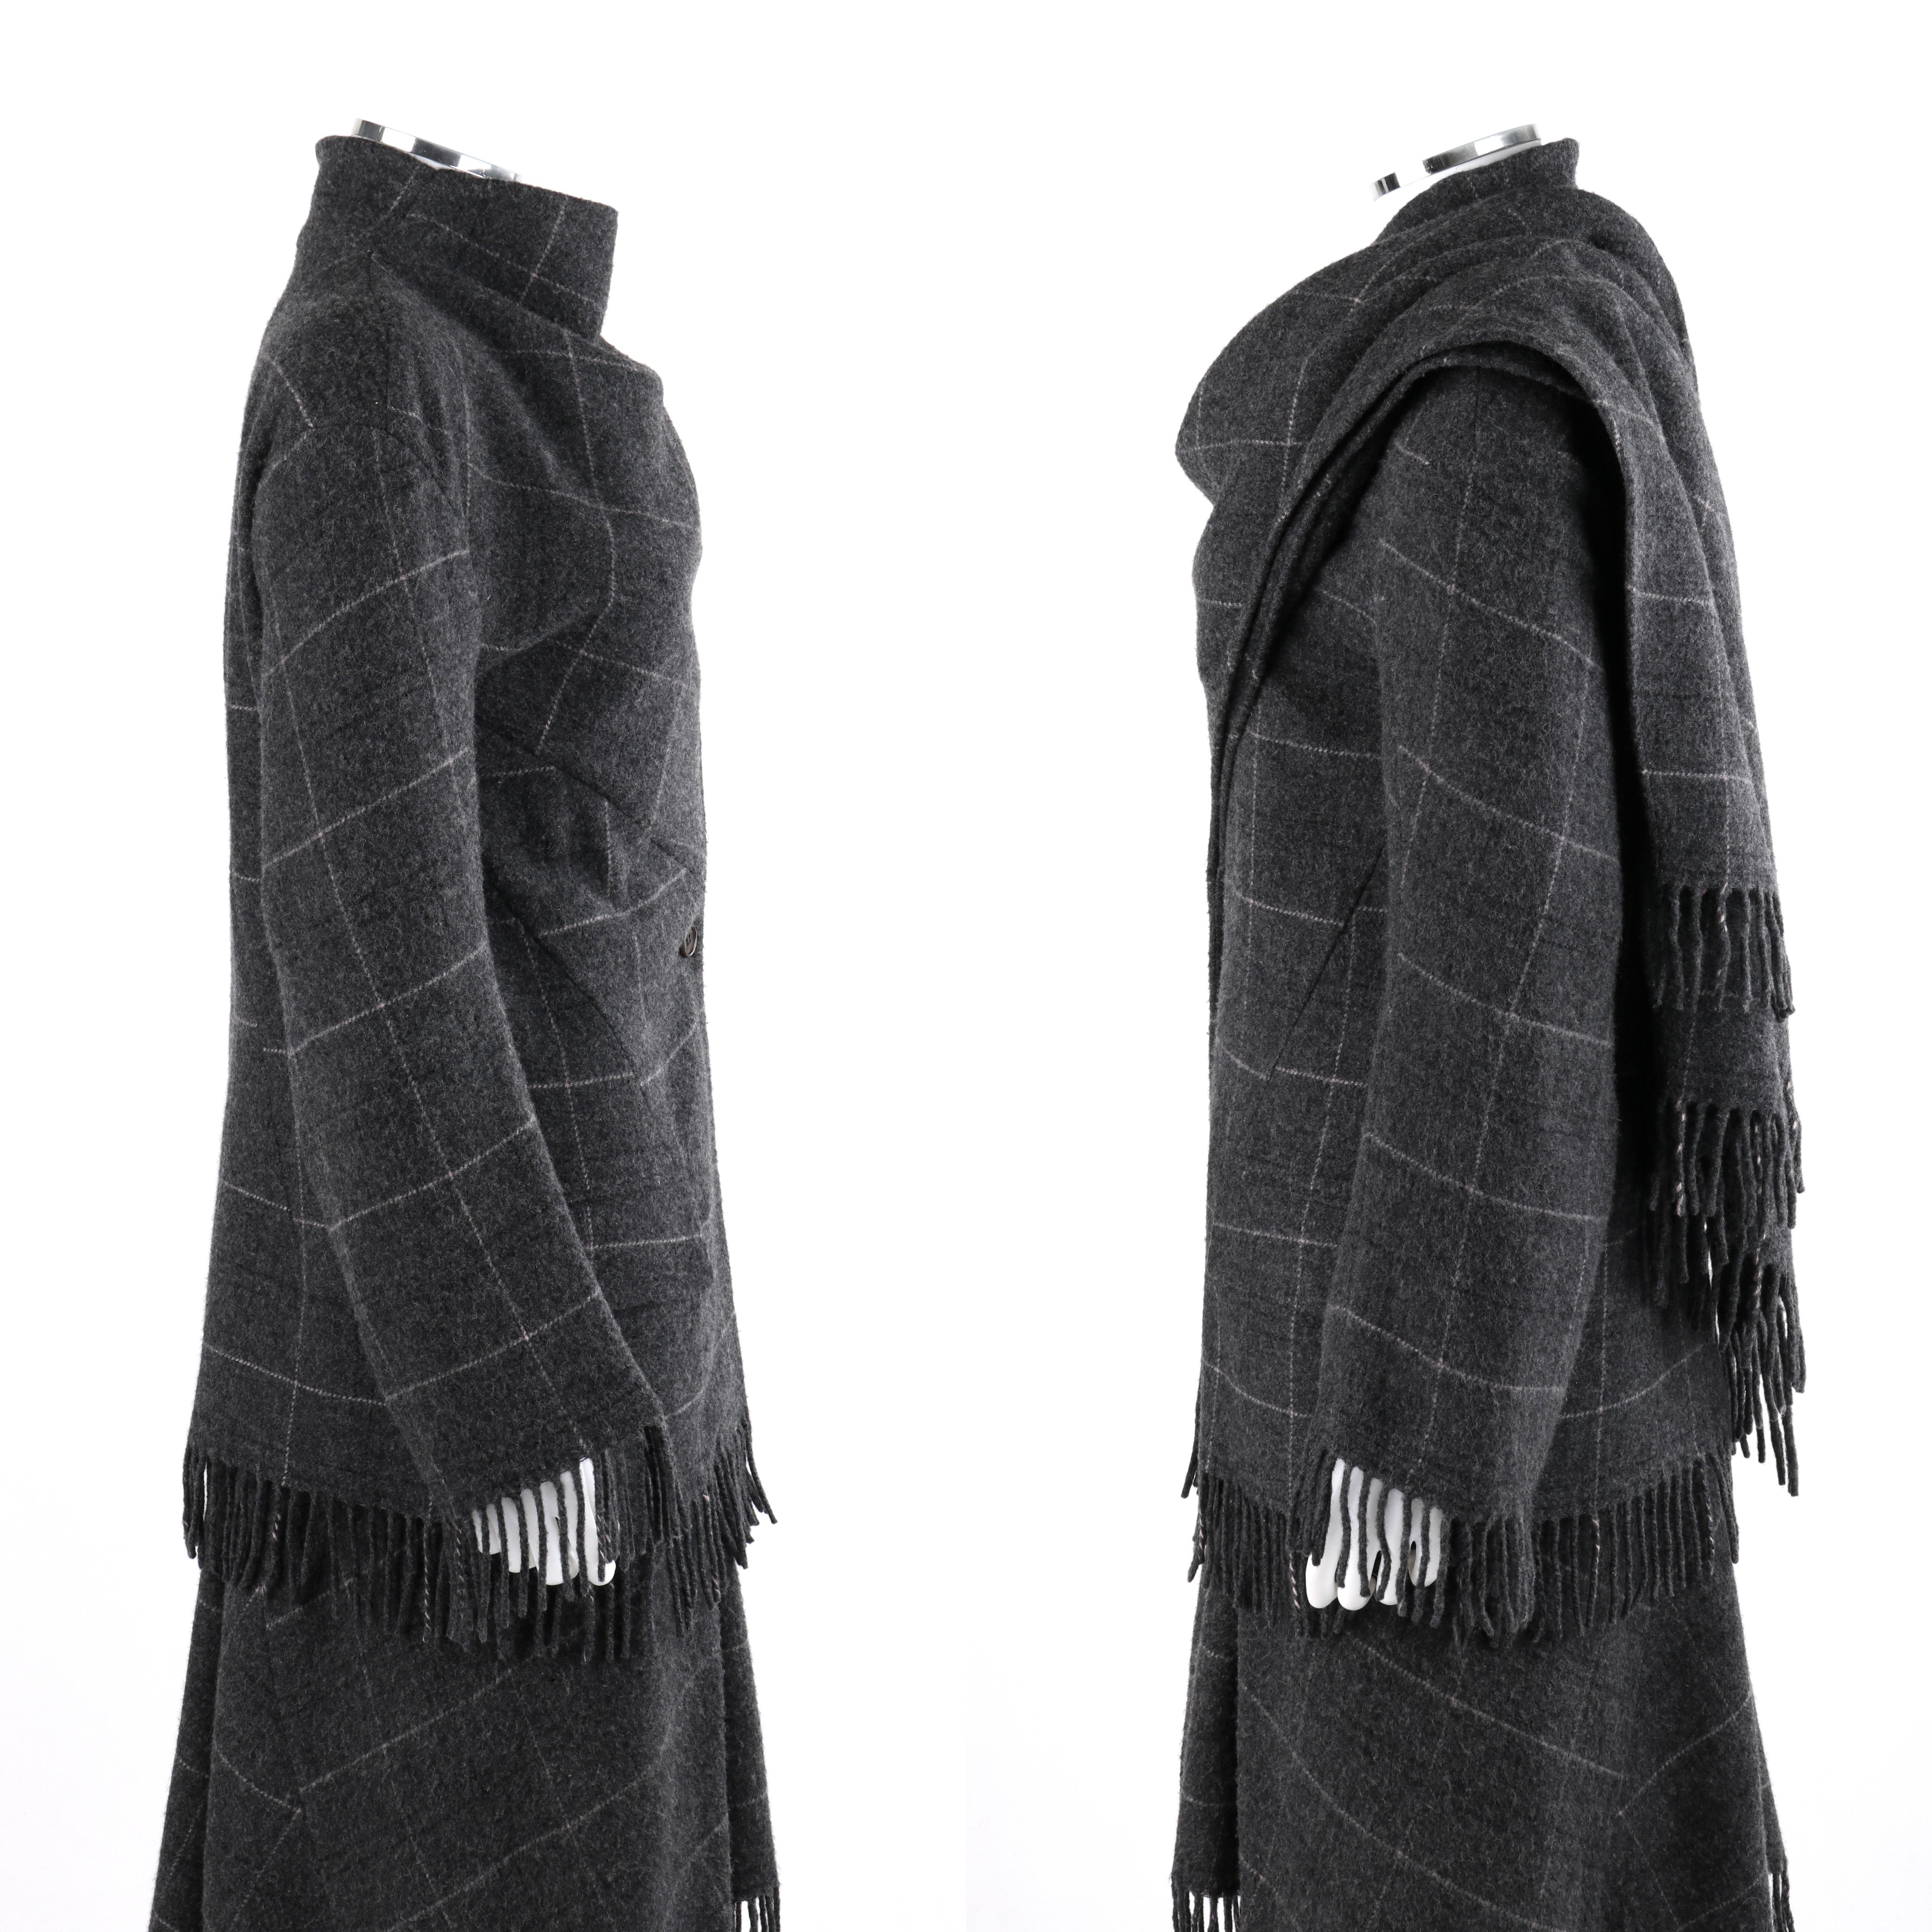 ALEXANDER McQUEEN A/W 1999 “The Overlook” Gray Check Fringe Jacket Skirt Set In Good Condition For Sale In Thiensville, WI